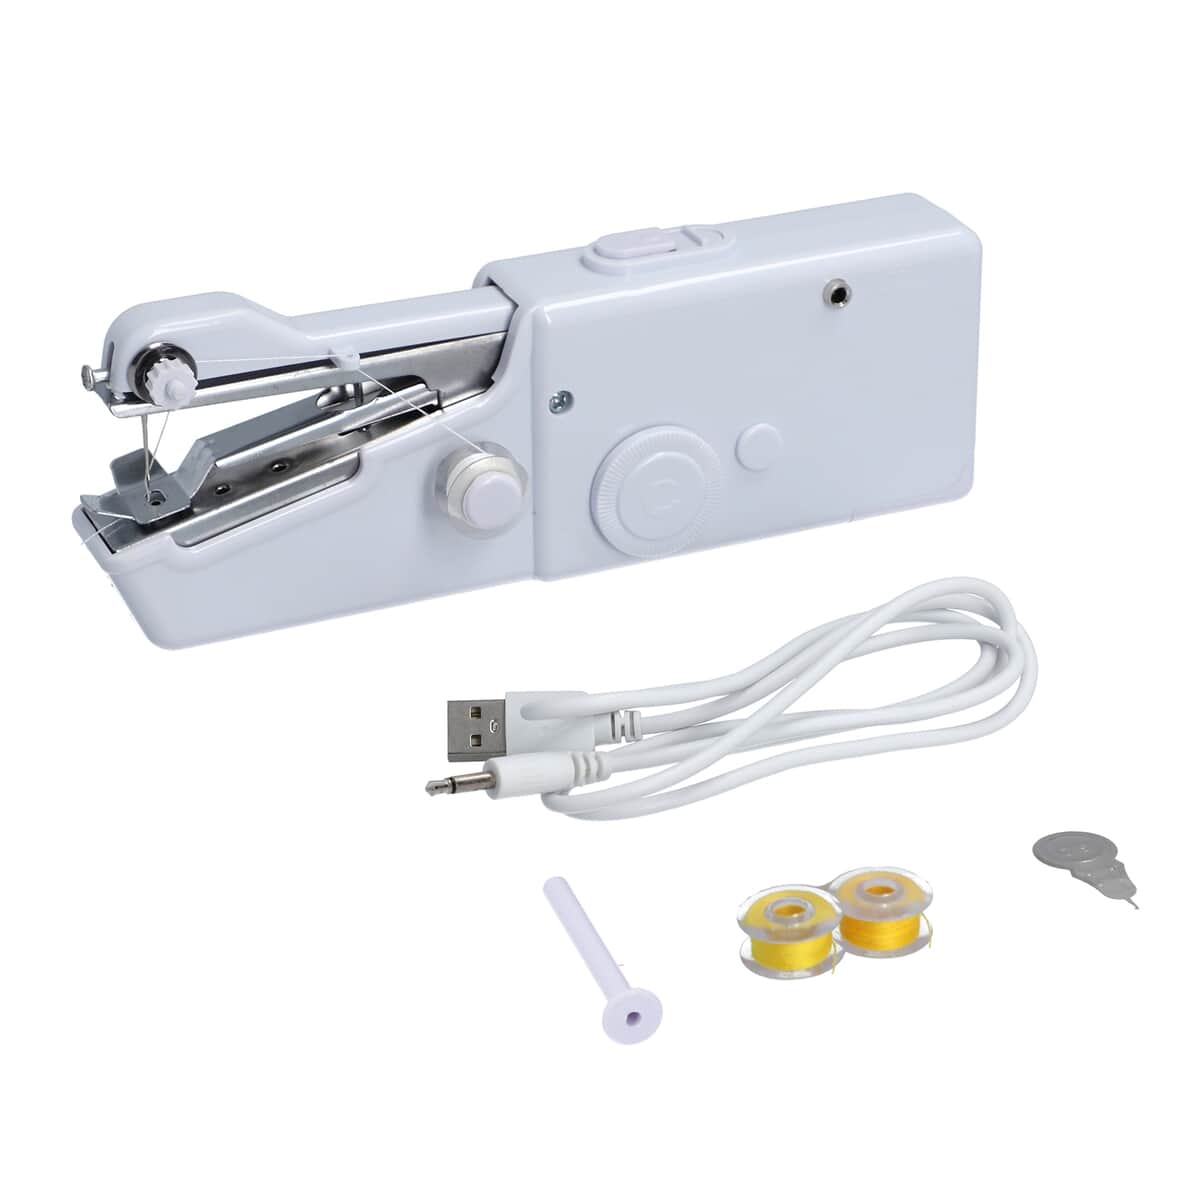 White Handy Stitch Handheld Sewing Machine (4x1.5V Battery Not included) image number 0